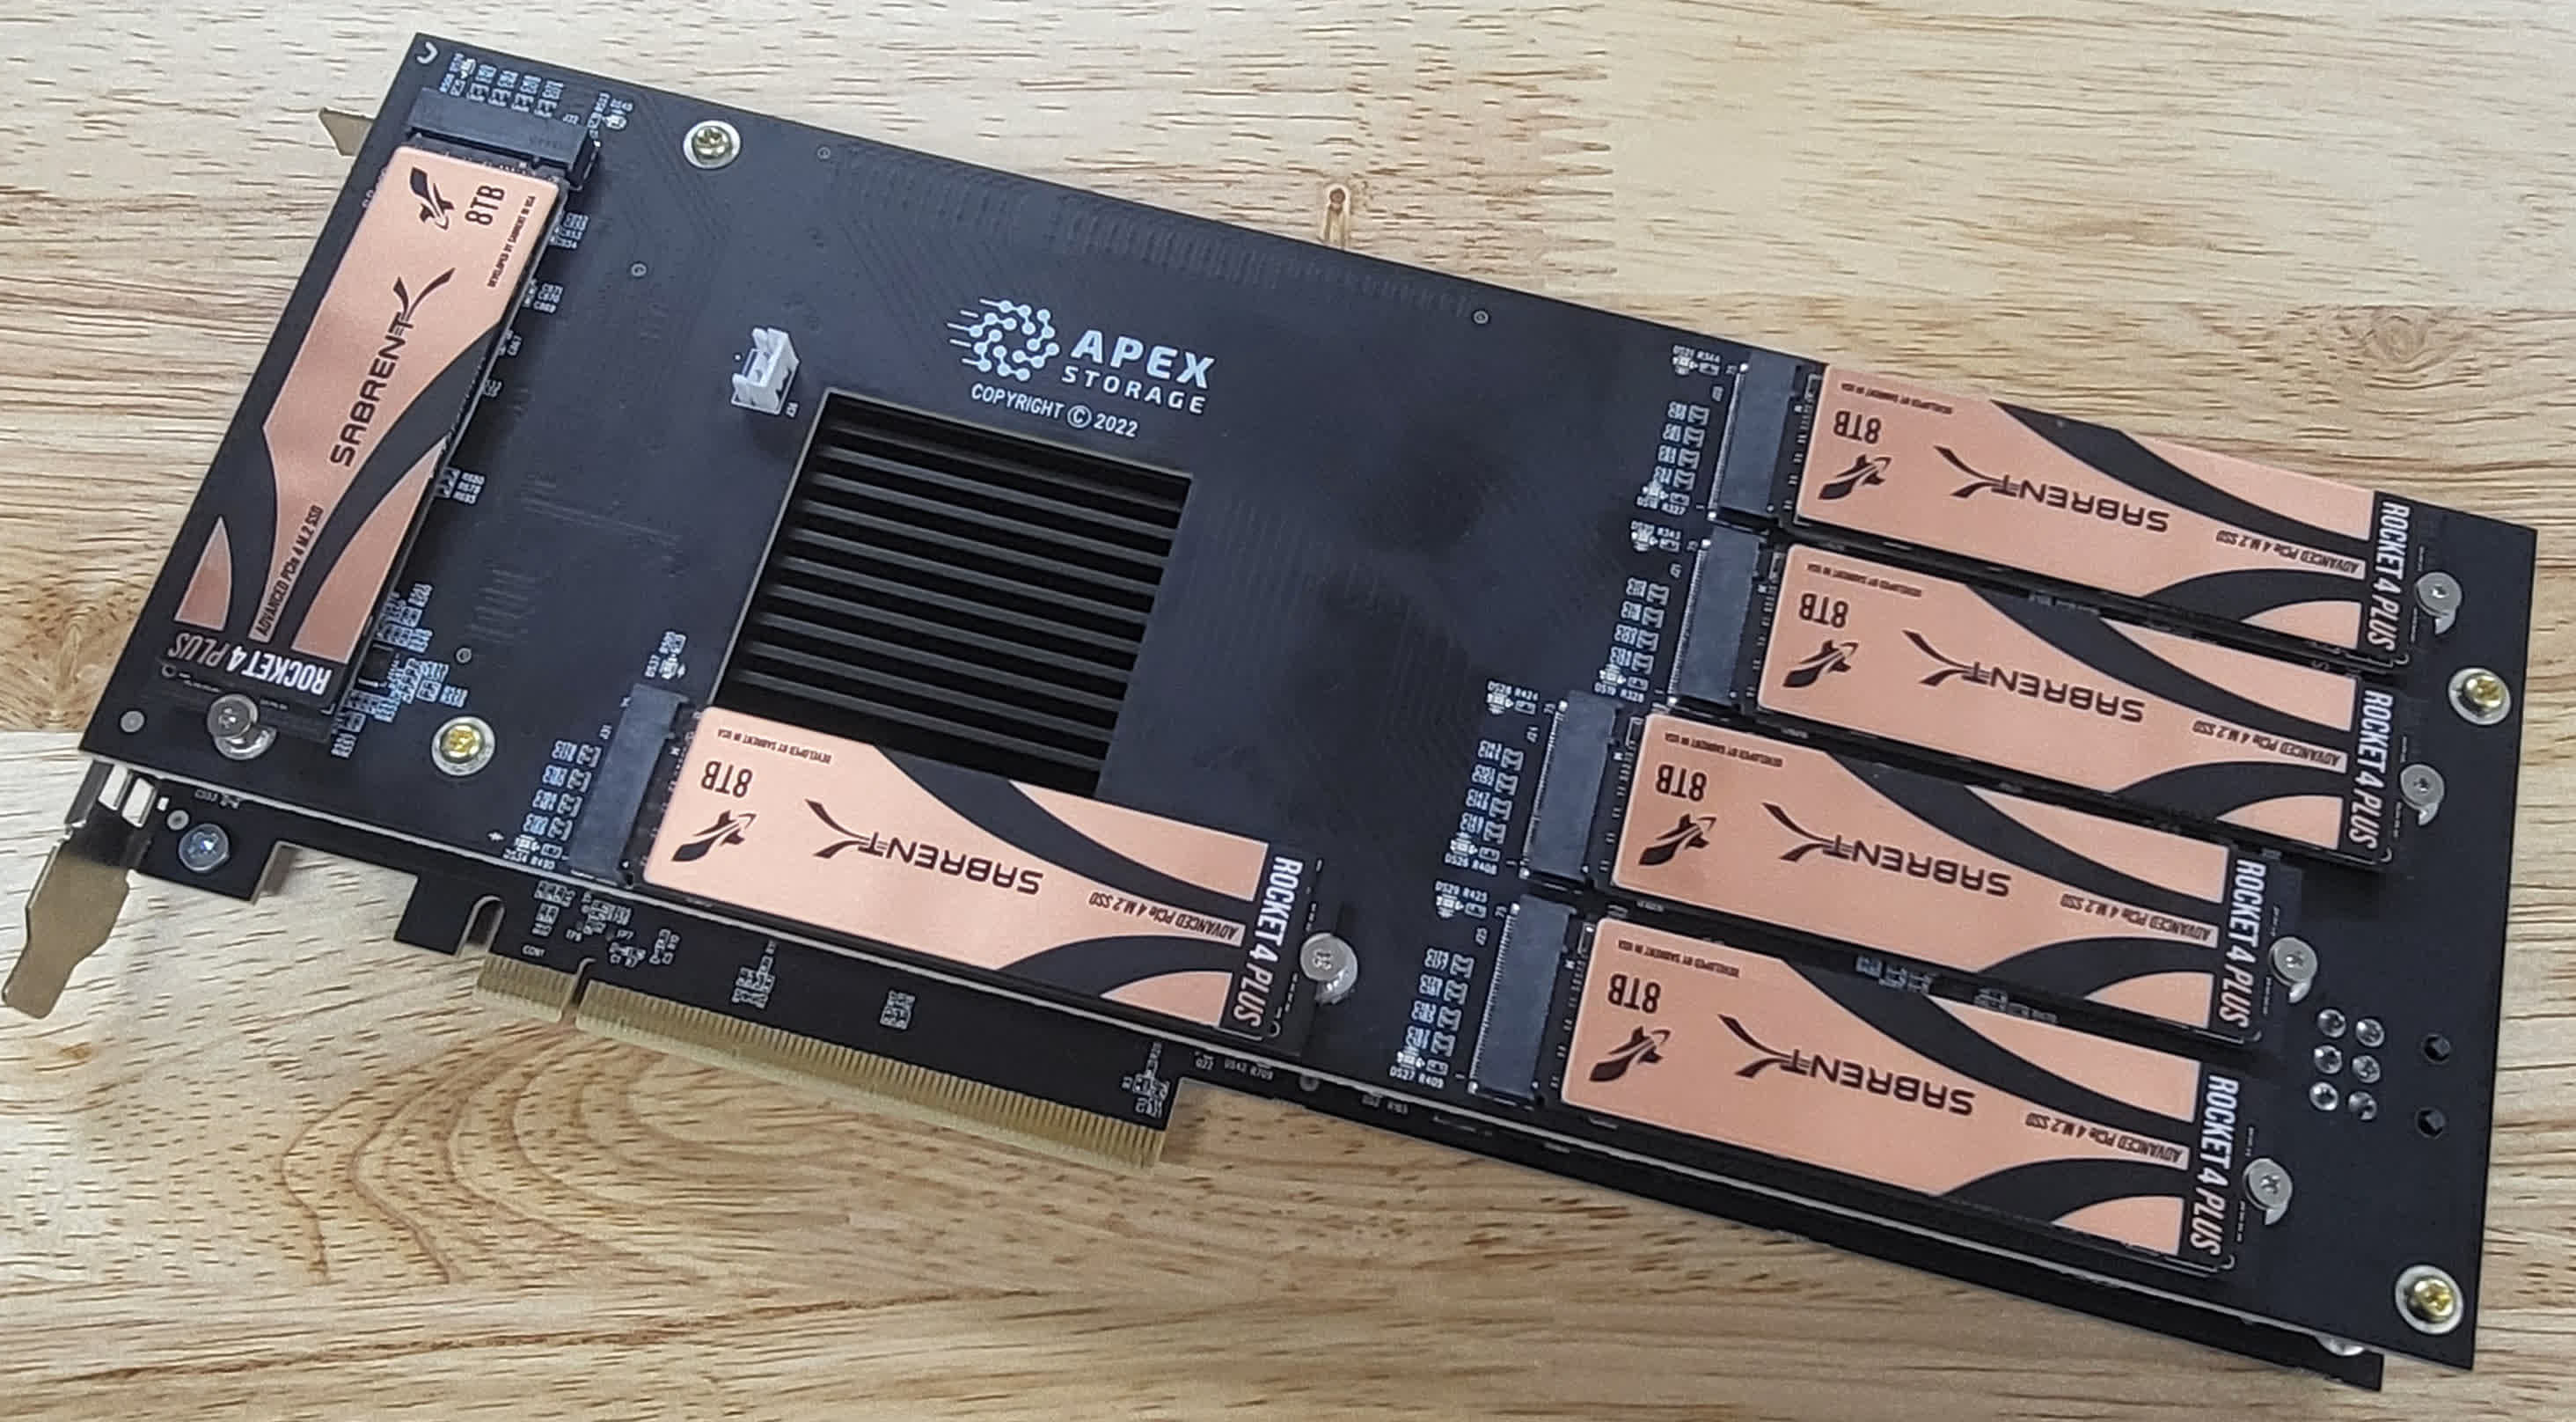 This PCIe card houses 21 M.2 SSDs for up to 168 terabytes of blazing-fast storage